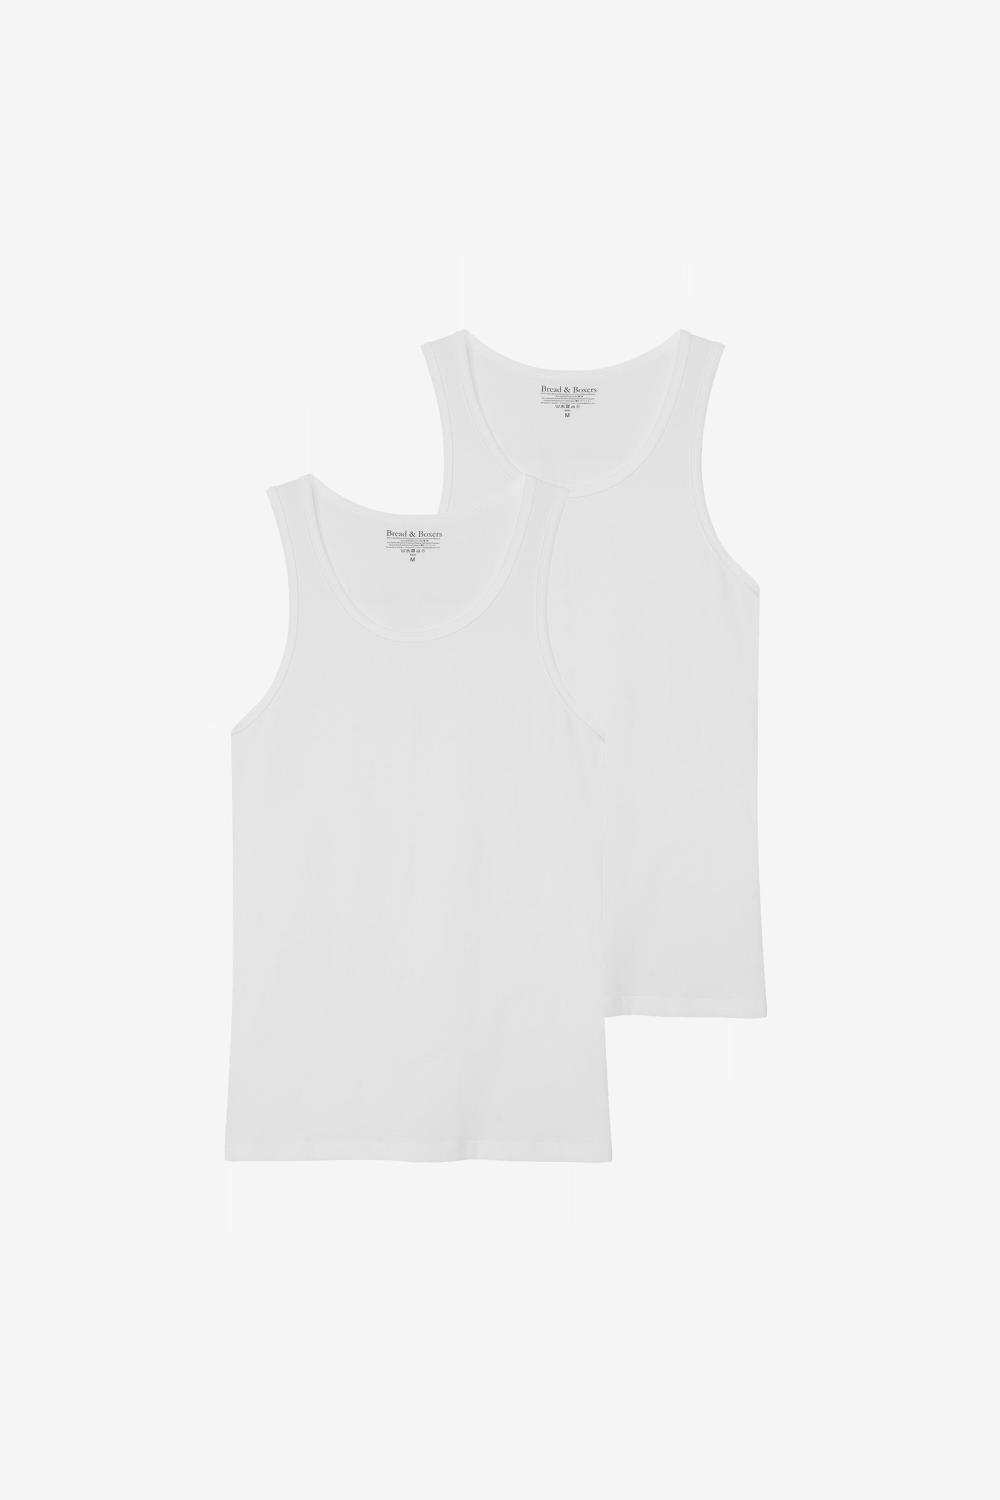 Bread & Boxers Tank 2-Pack